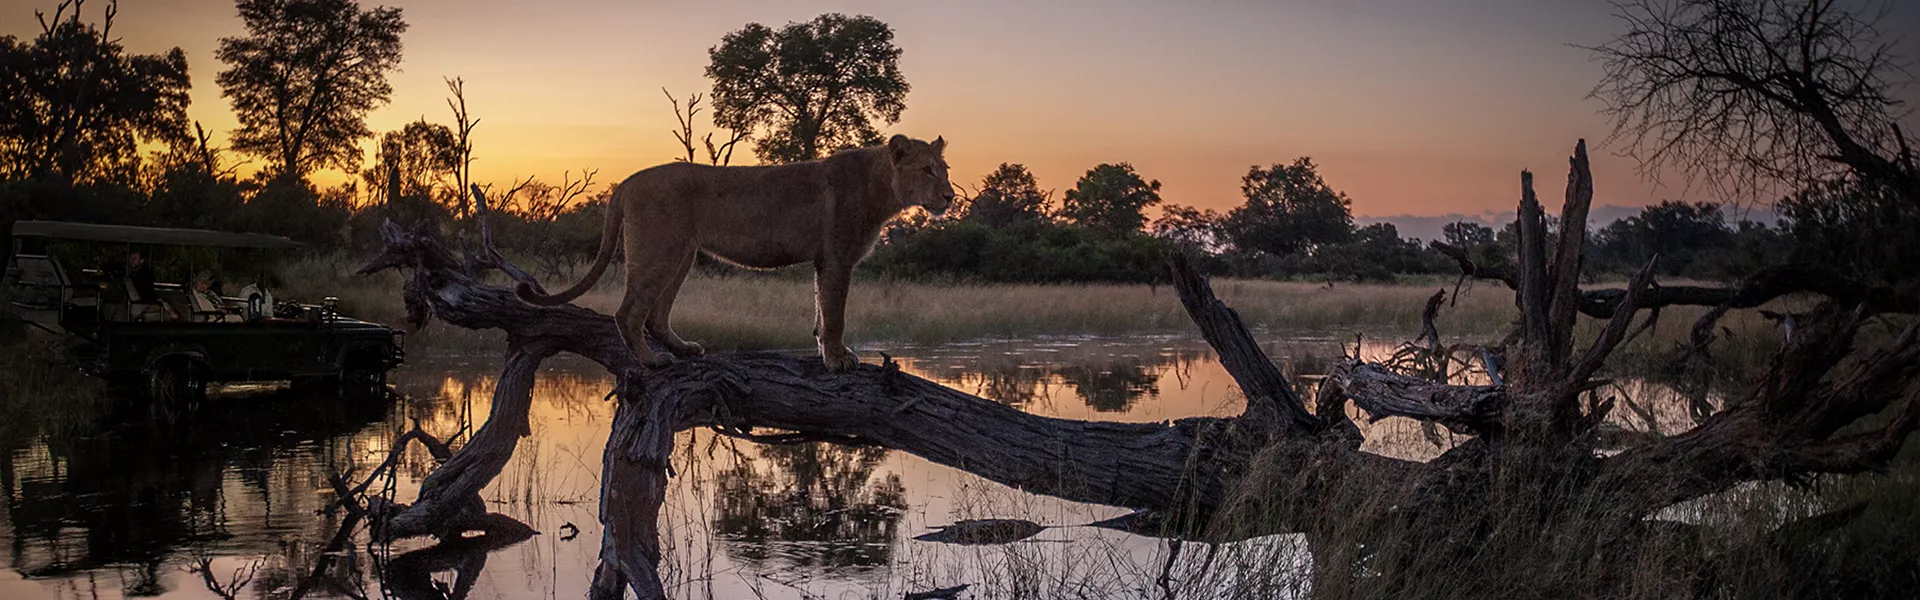 Lioness on a tree branch by the water at sunset